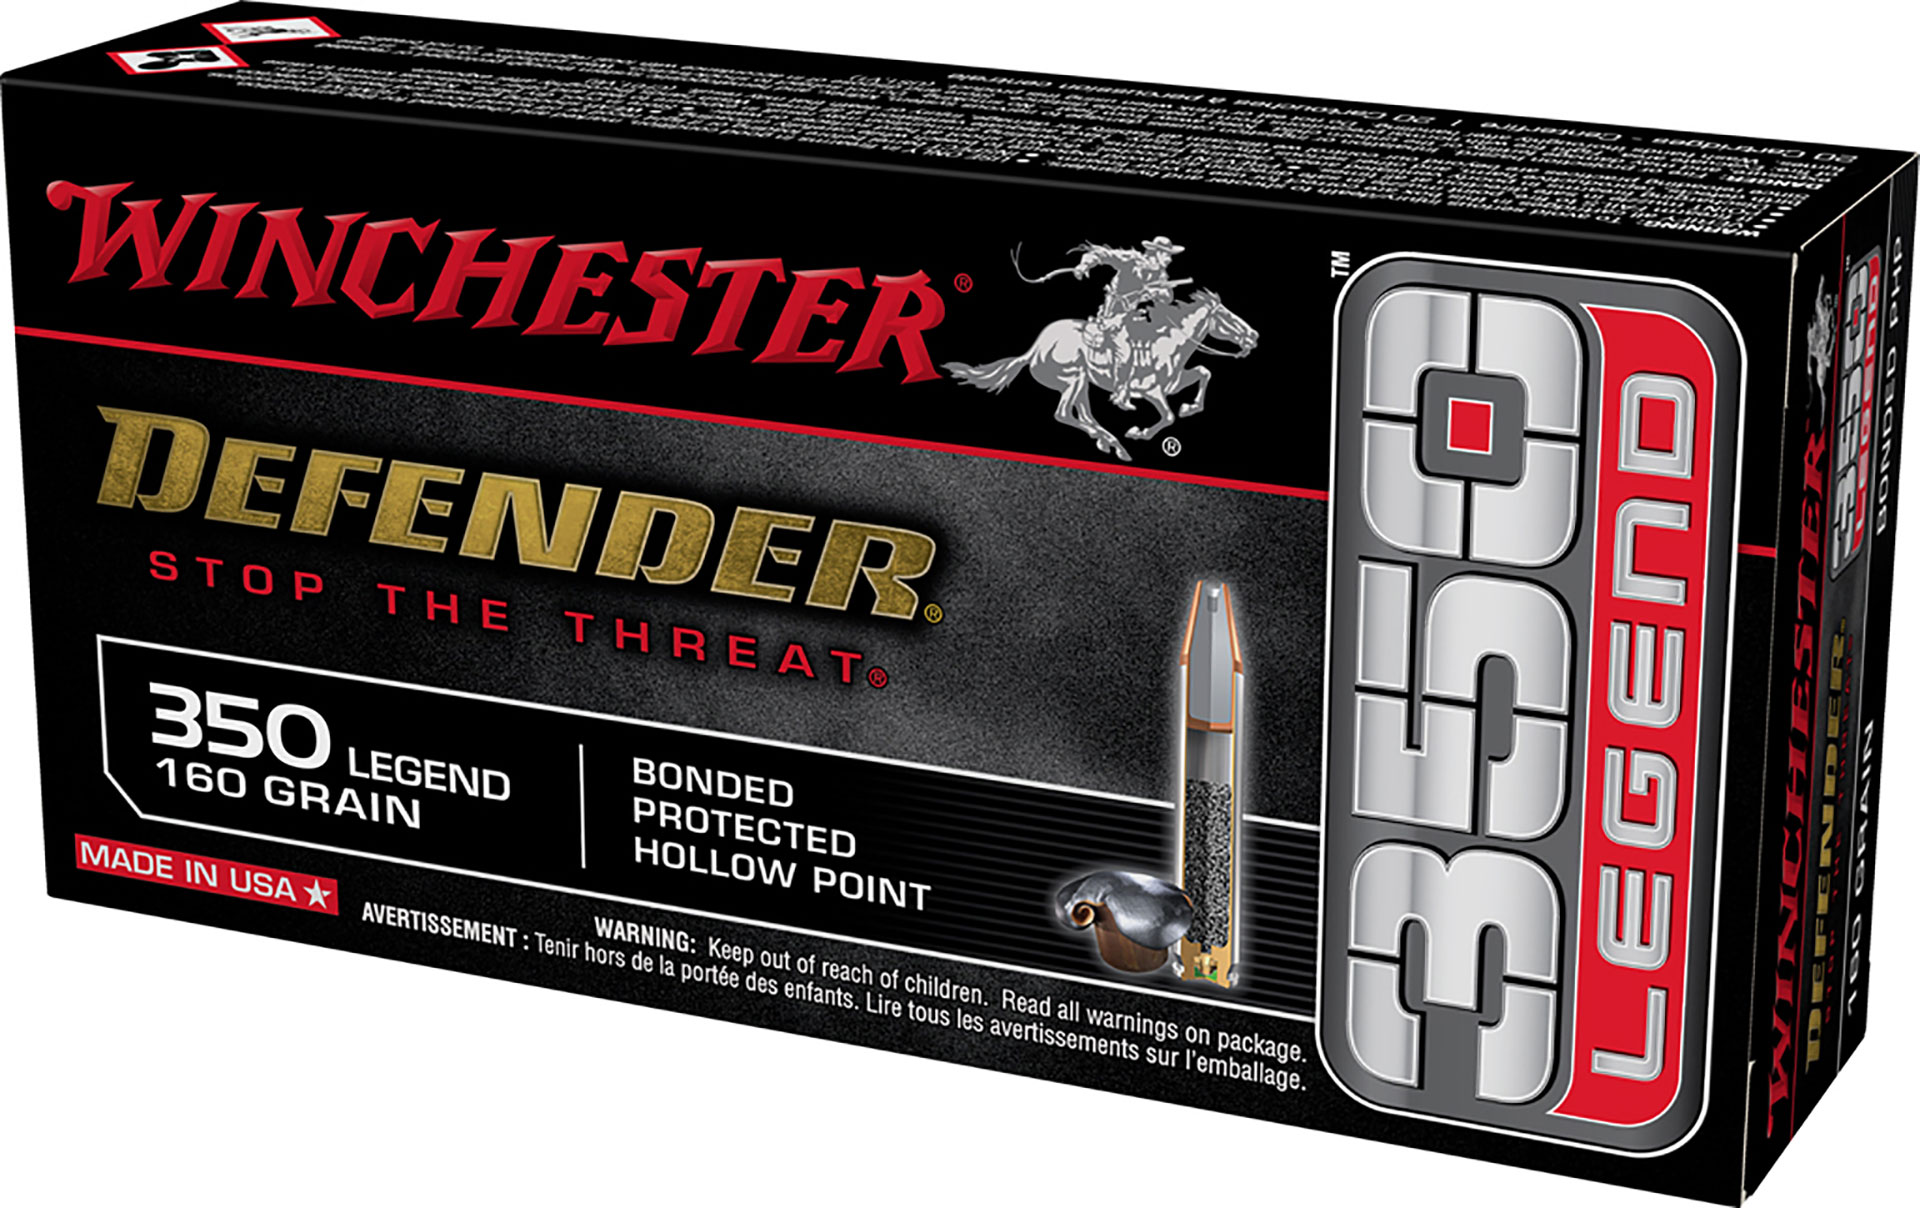 The launch of Winchester’s Defender load filled the missing personal protection ammunition niche in 2021.